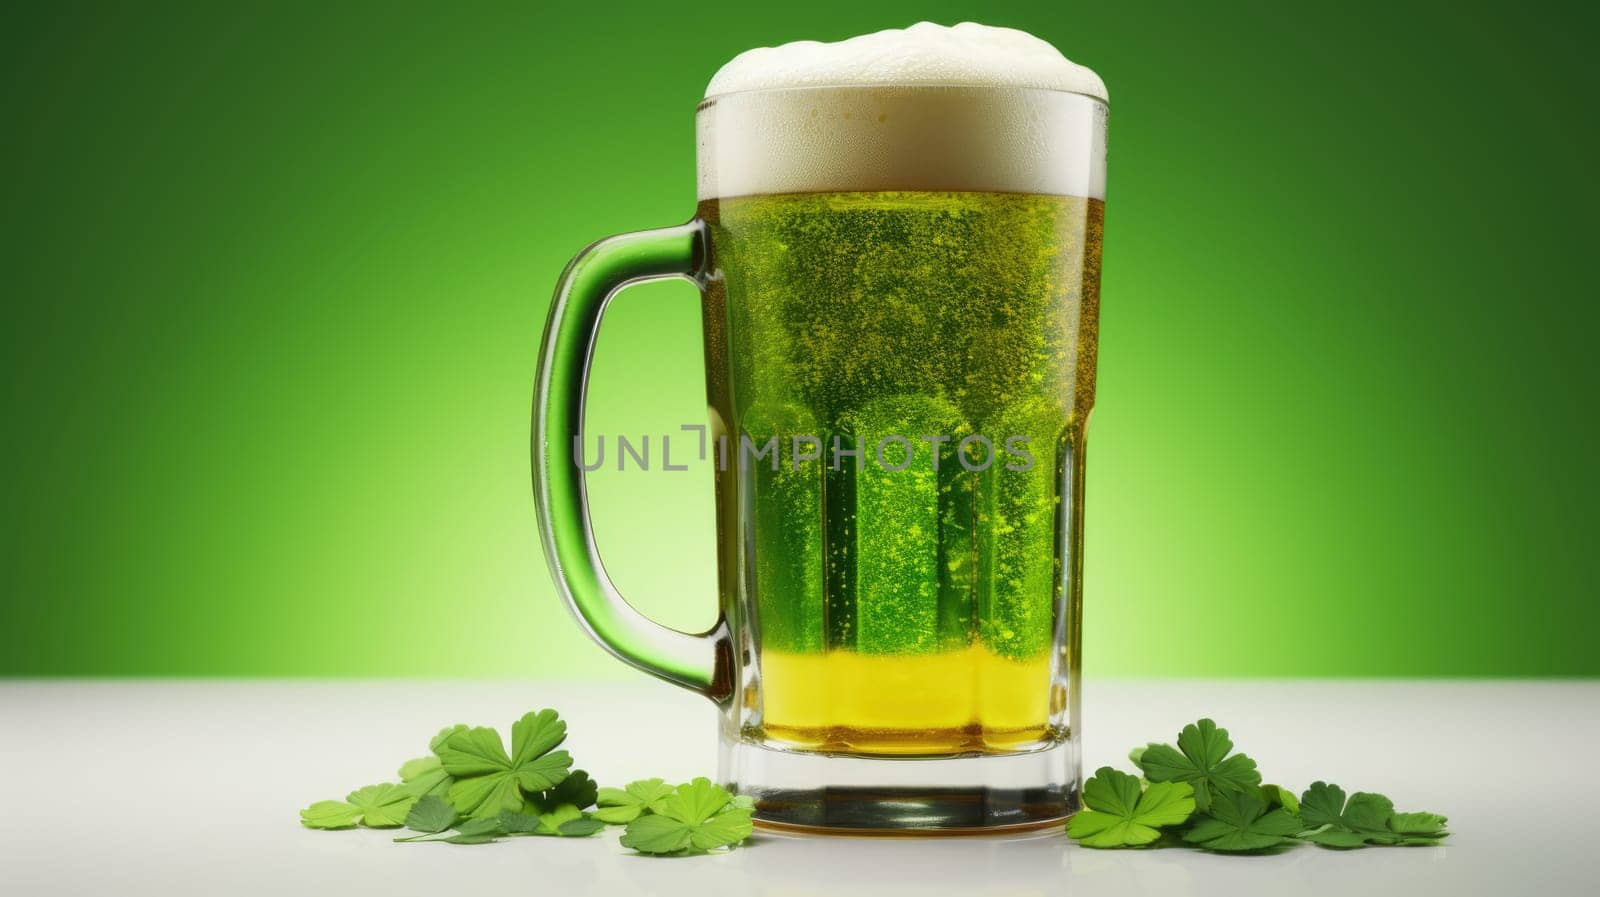 Cold green Beer with foam in a mug with Four-Leaf Clovers on green background, St. Patricks Day Celebration by JuliaDorian